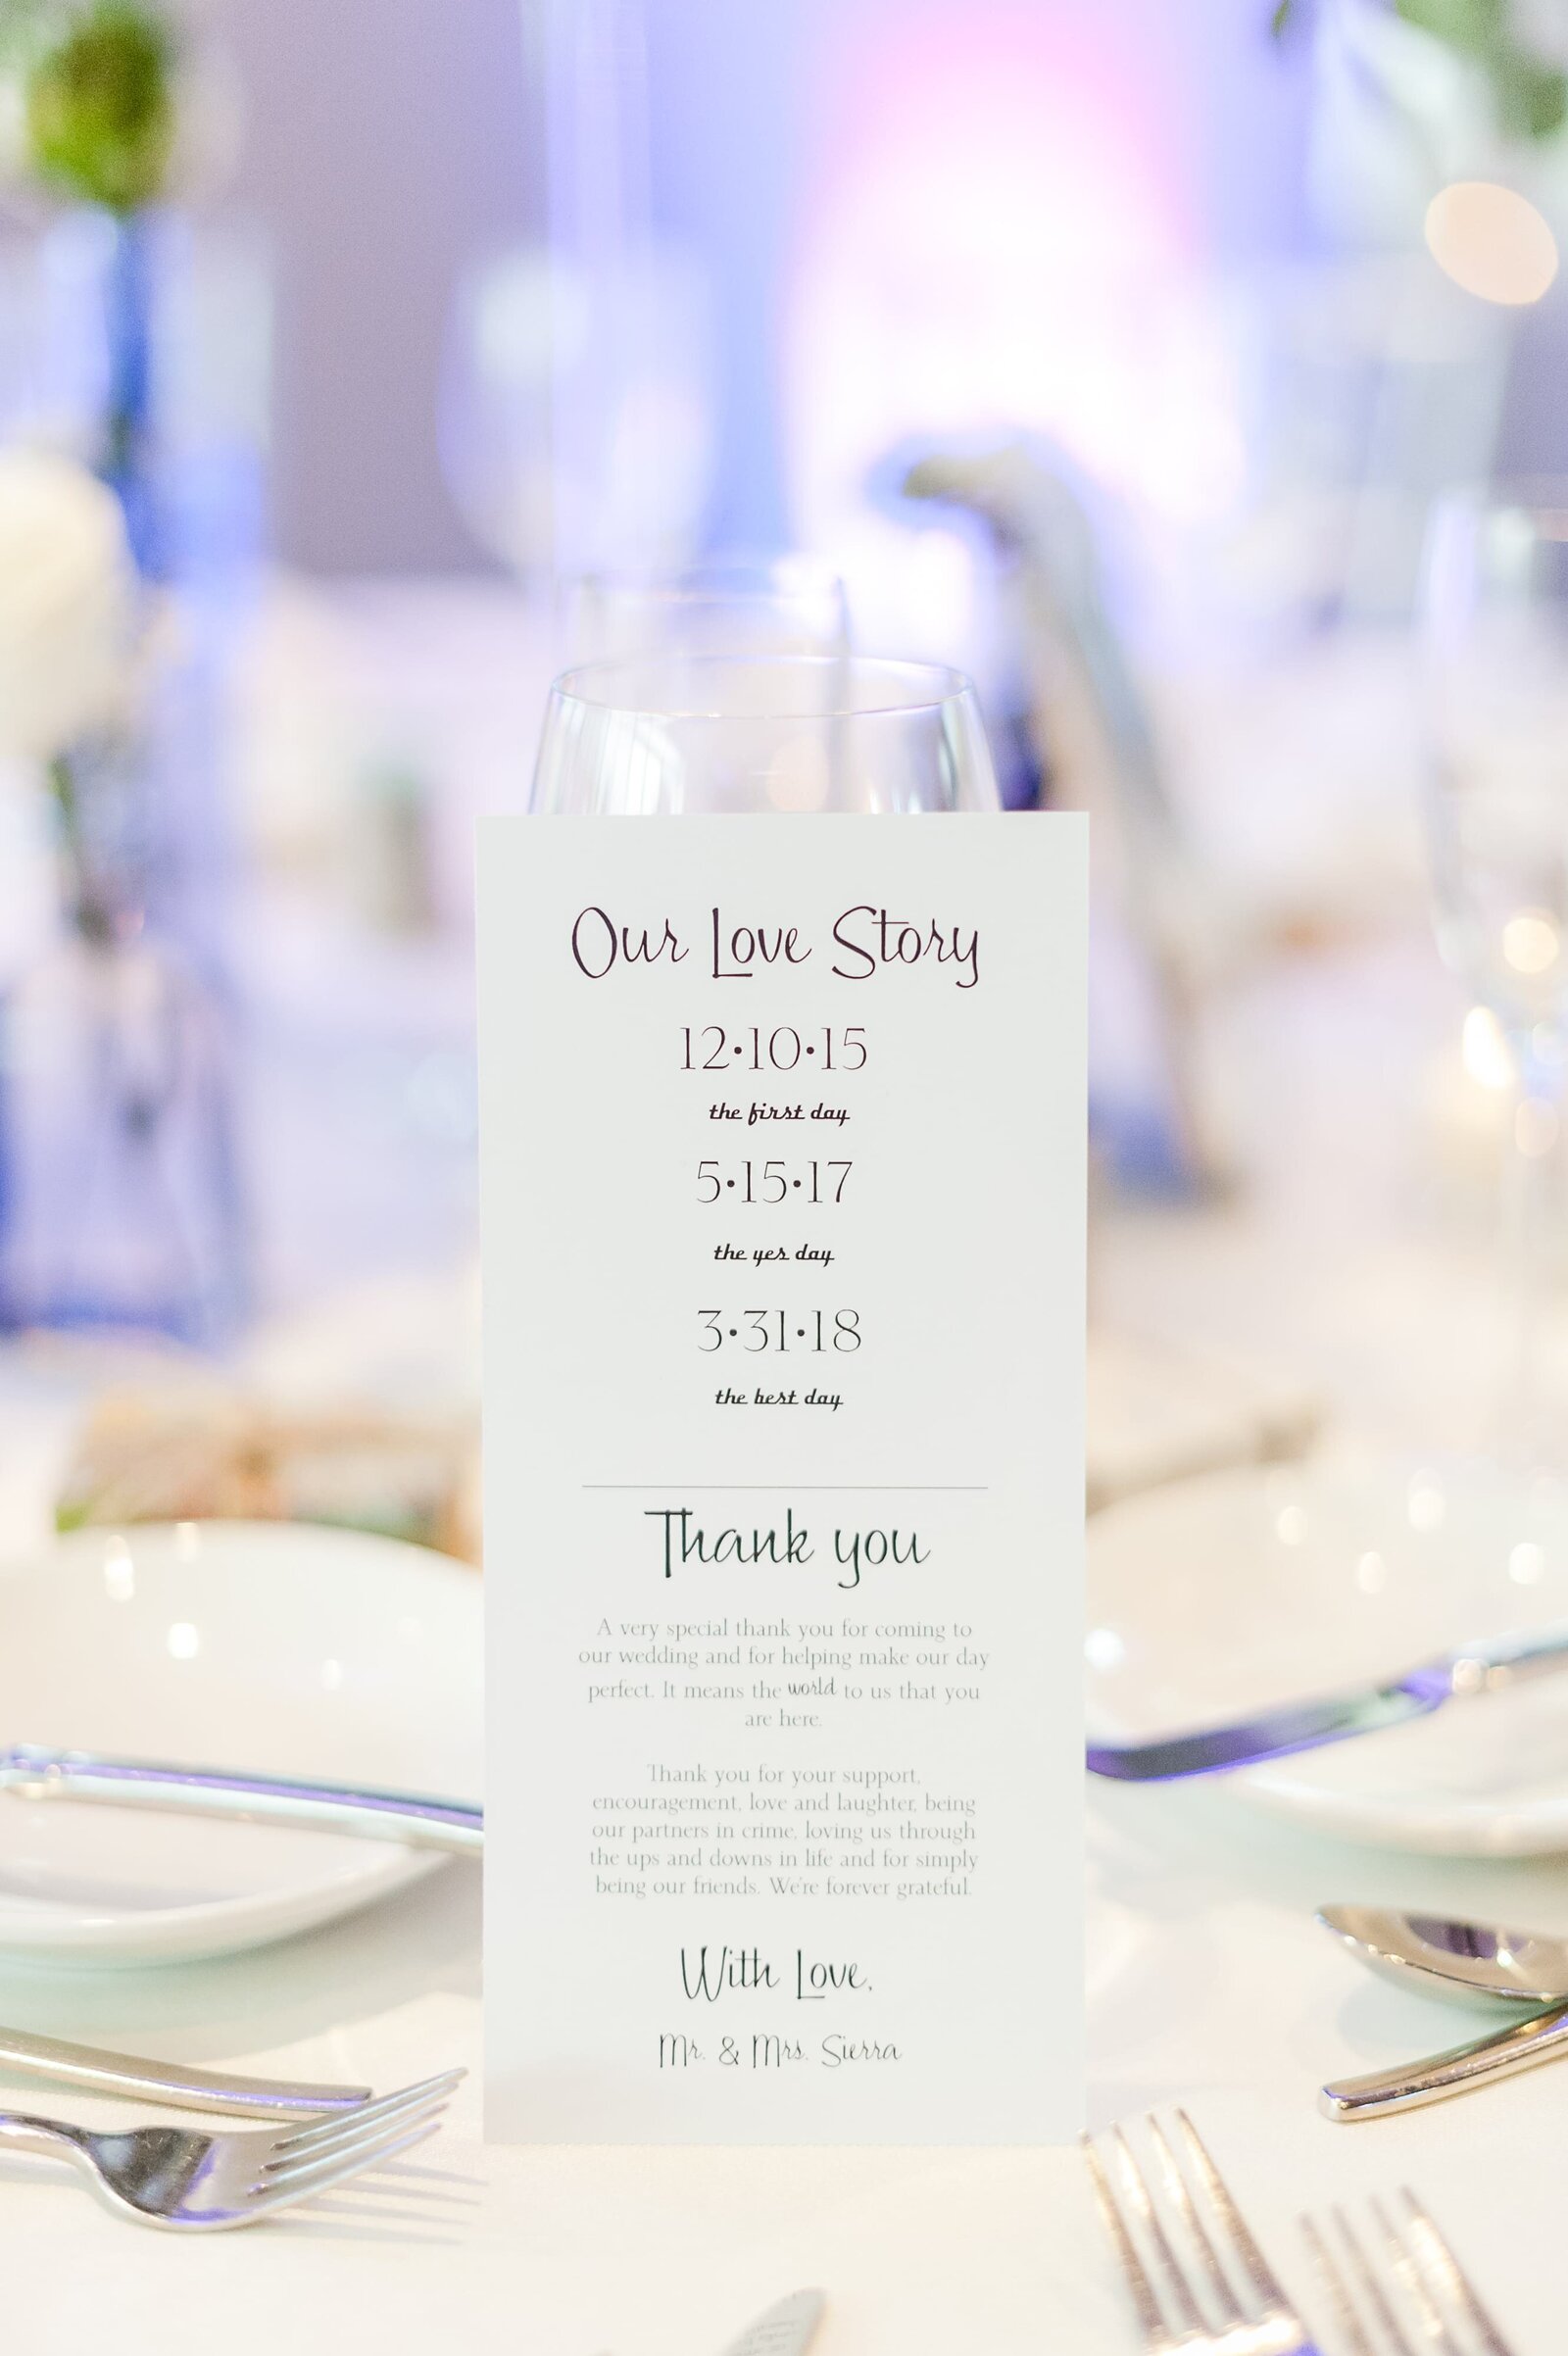 Wedding reception table card includes a thank you to their guests.